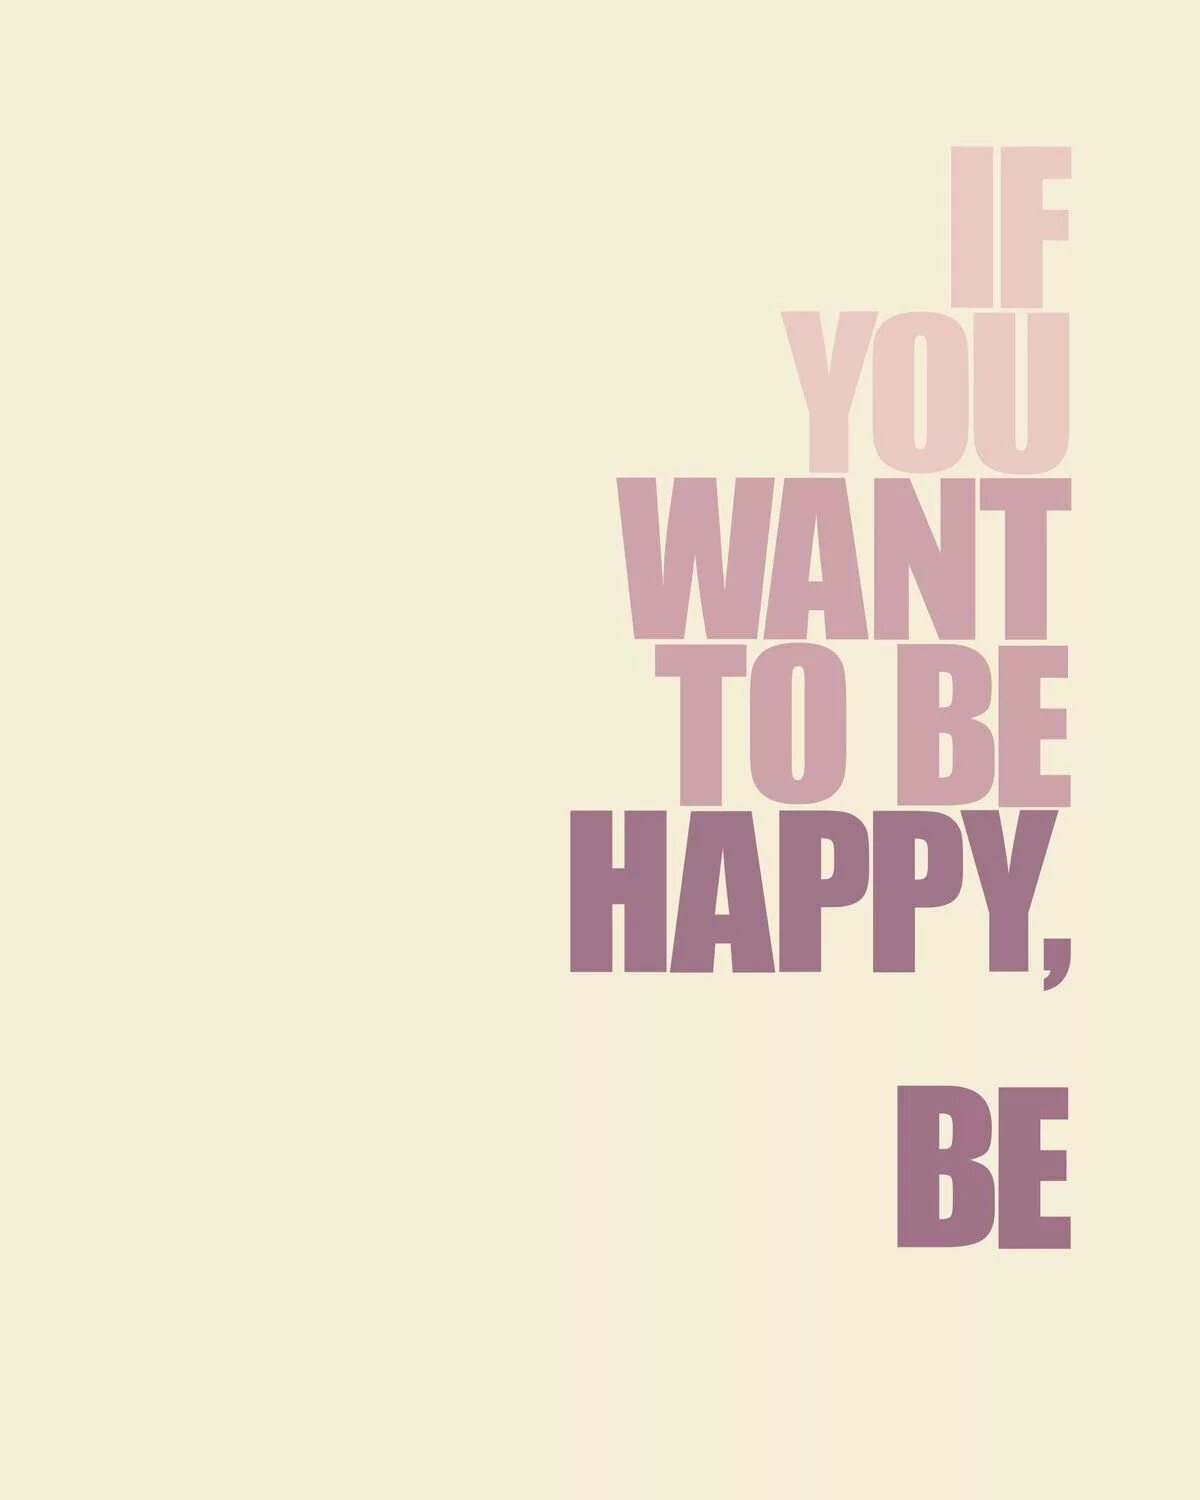 If you want to be Happy be. Be Happy. Цитаты be Happy be. I want to be Happy картинки. Decide to be happy